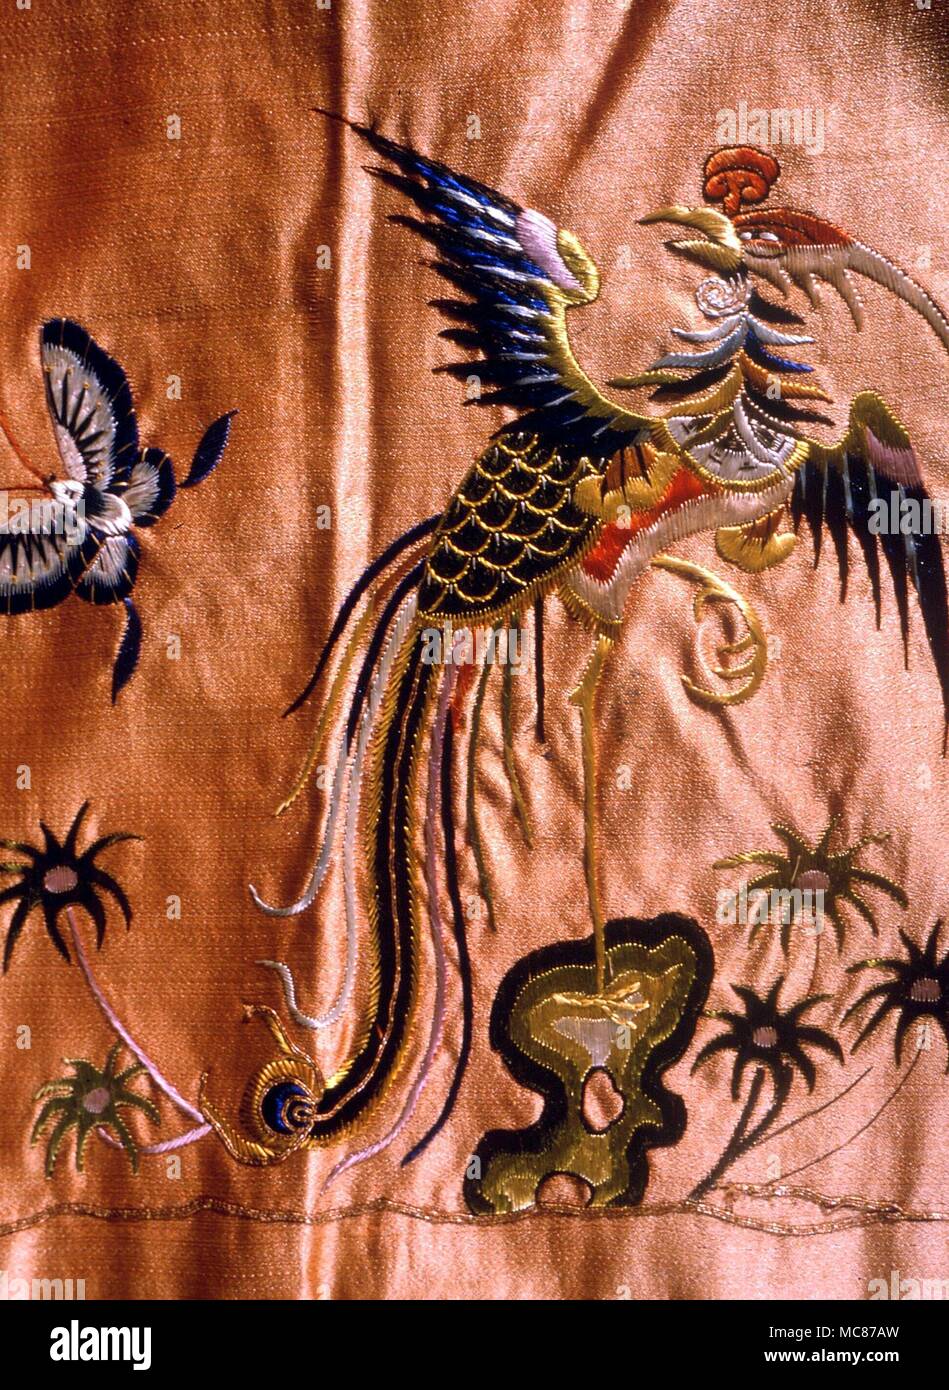 Chinese partridge embroidered on a Chinese silk. The partridge is sometimes confused with the Phoenix, though the latter has a long neck Stock Photo